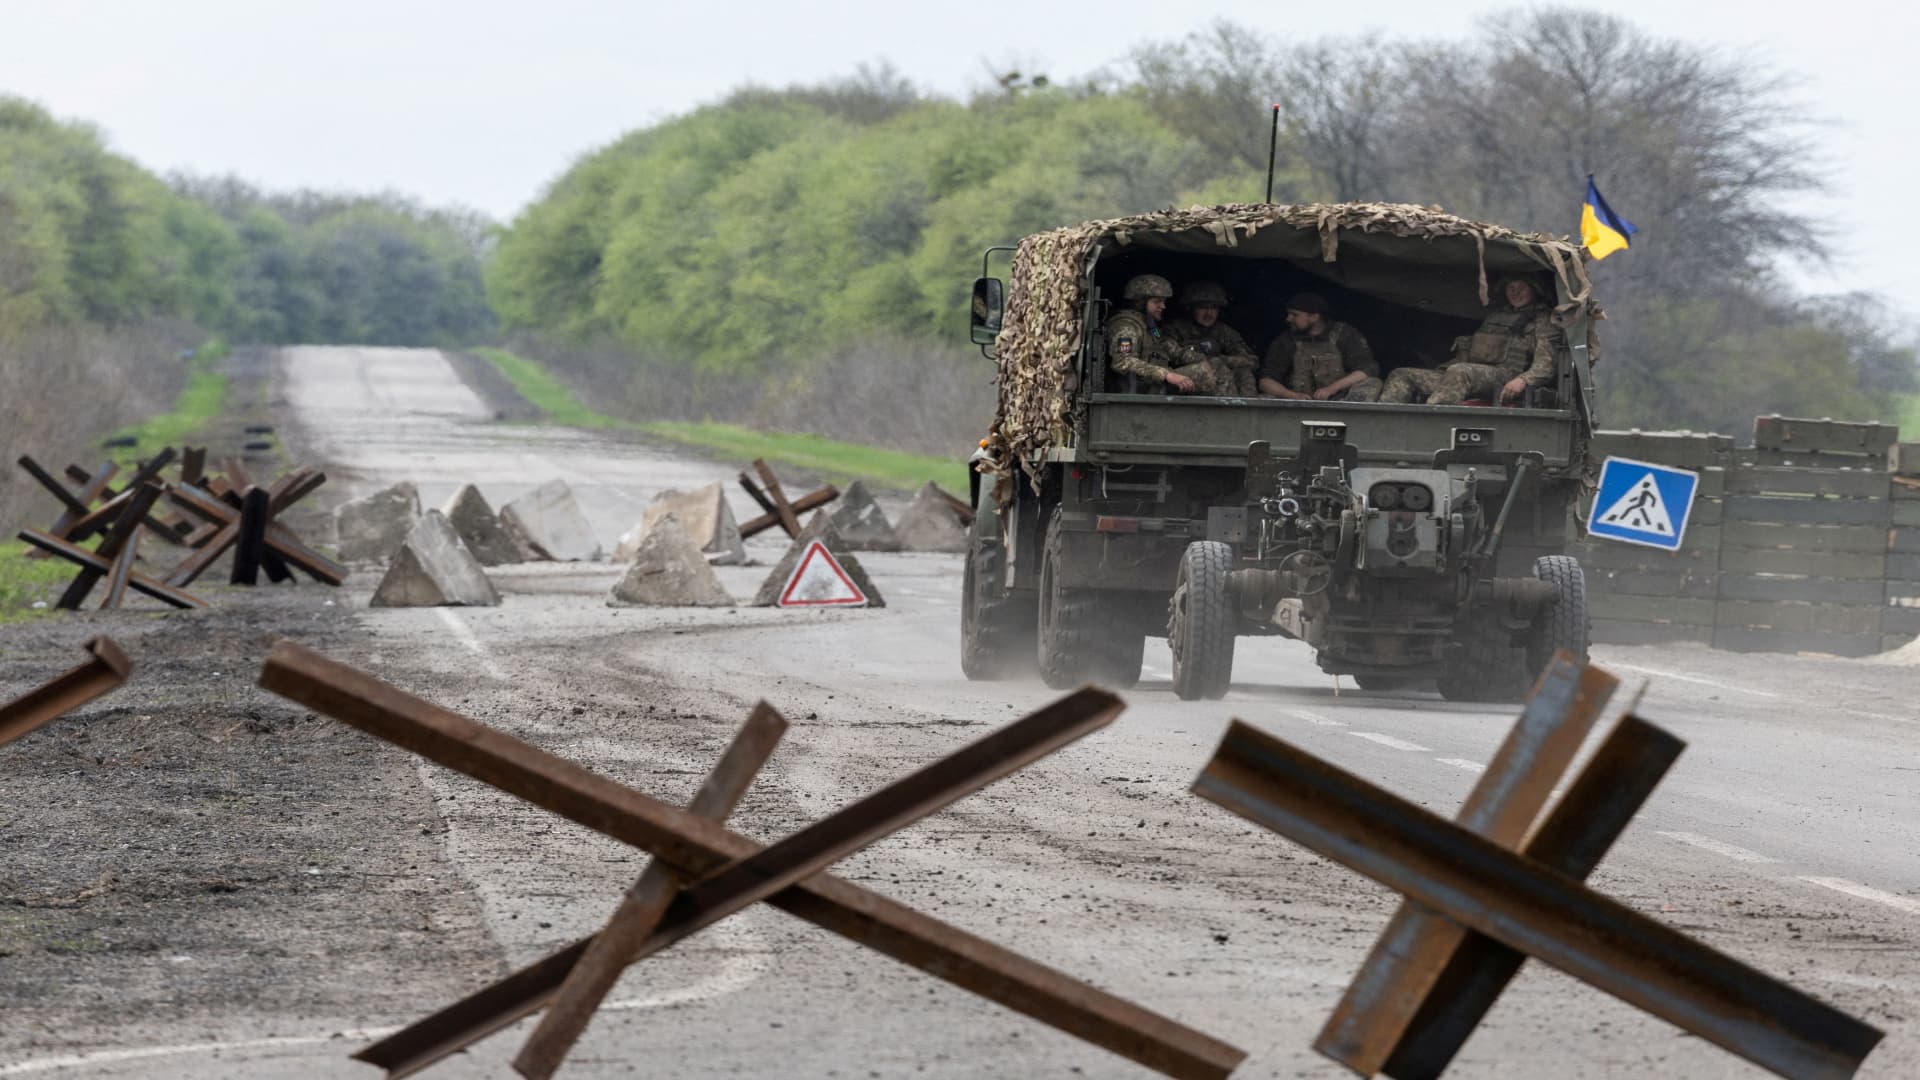 A Ukrainian military vehicle drives to the front line during a fight, amid Russia's invasion in Ukraine, near Izyum, Kharkiv region, Ukraine, April 23, 2022. 